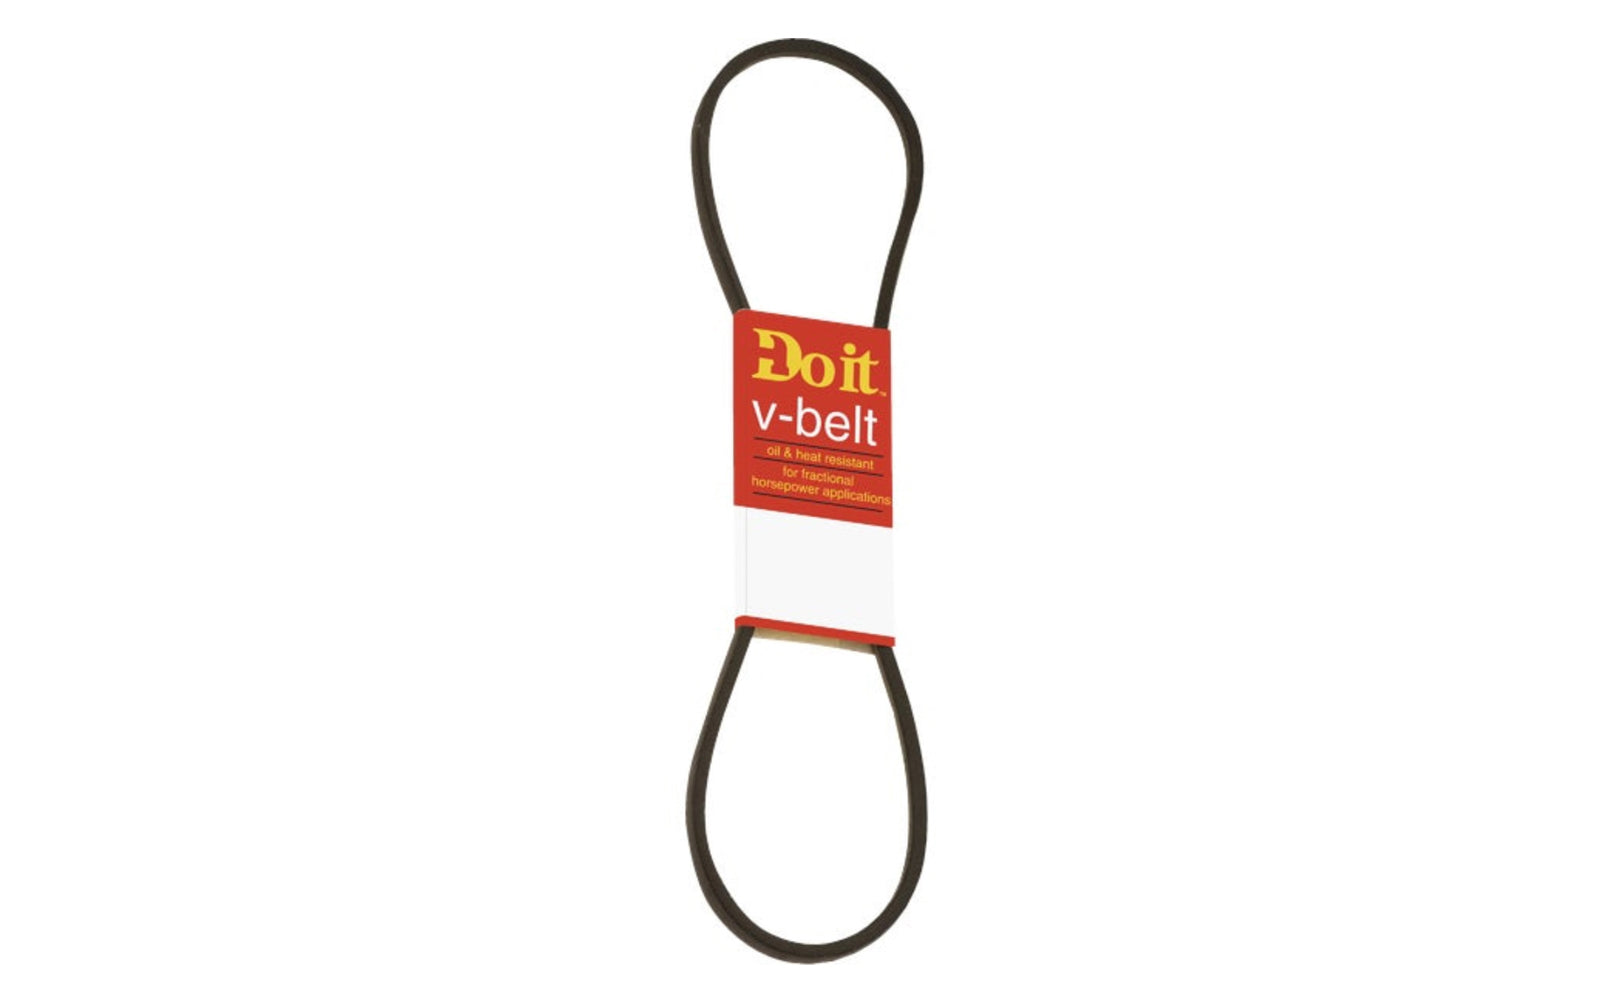 40" (1016 mm) Long x 1/2" (13 mm) Width Rubber V-Belt - 4L400. Oil & heat resistant. Recommended for 1-3 HP (horsepower) light-duty applications. Typically the best option for electric powered applications. For refrigerators, washing machines, pumps, stokers, woodworking machines. Pulley type: A-Pulley.